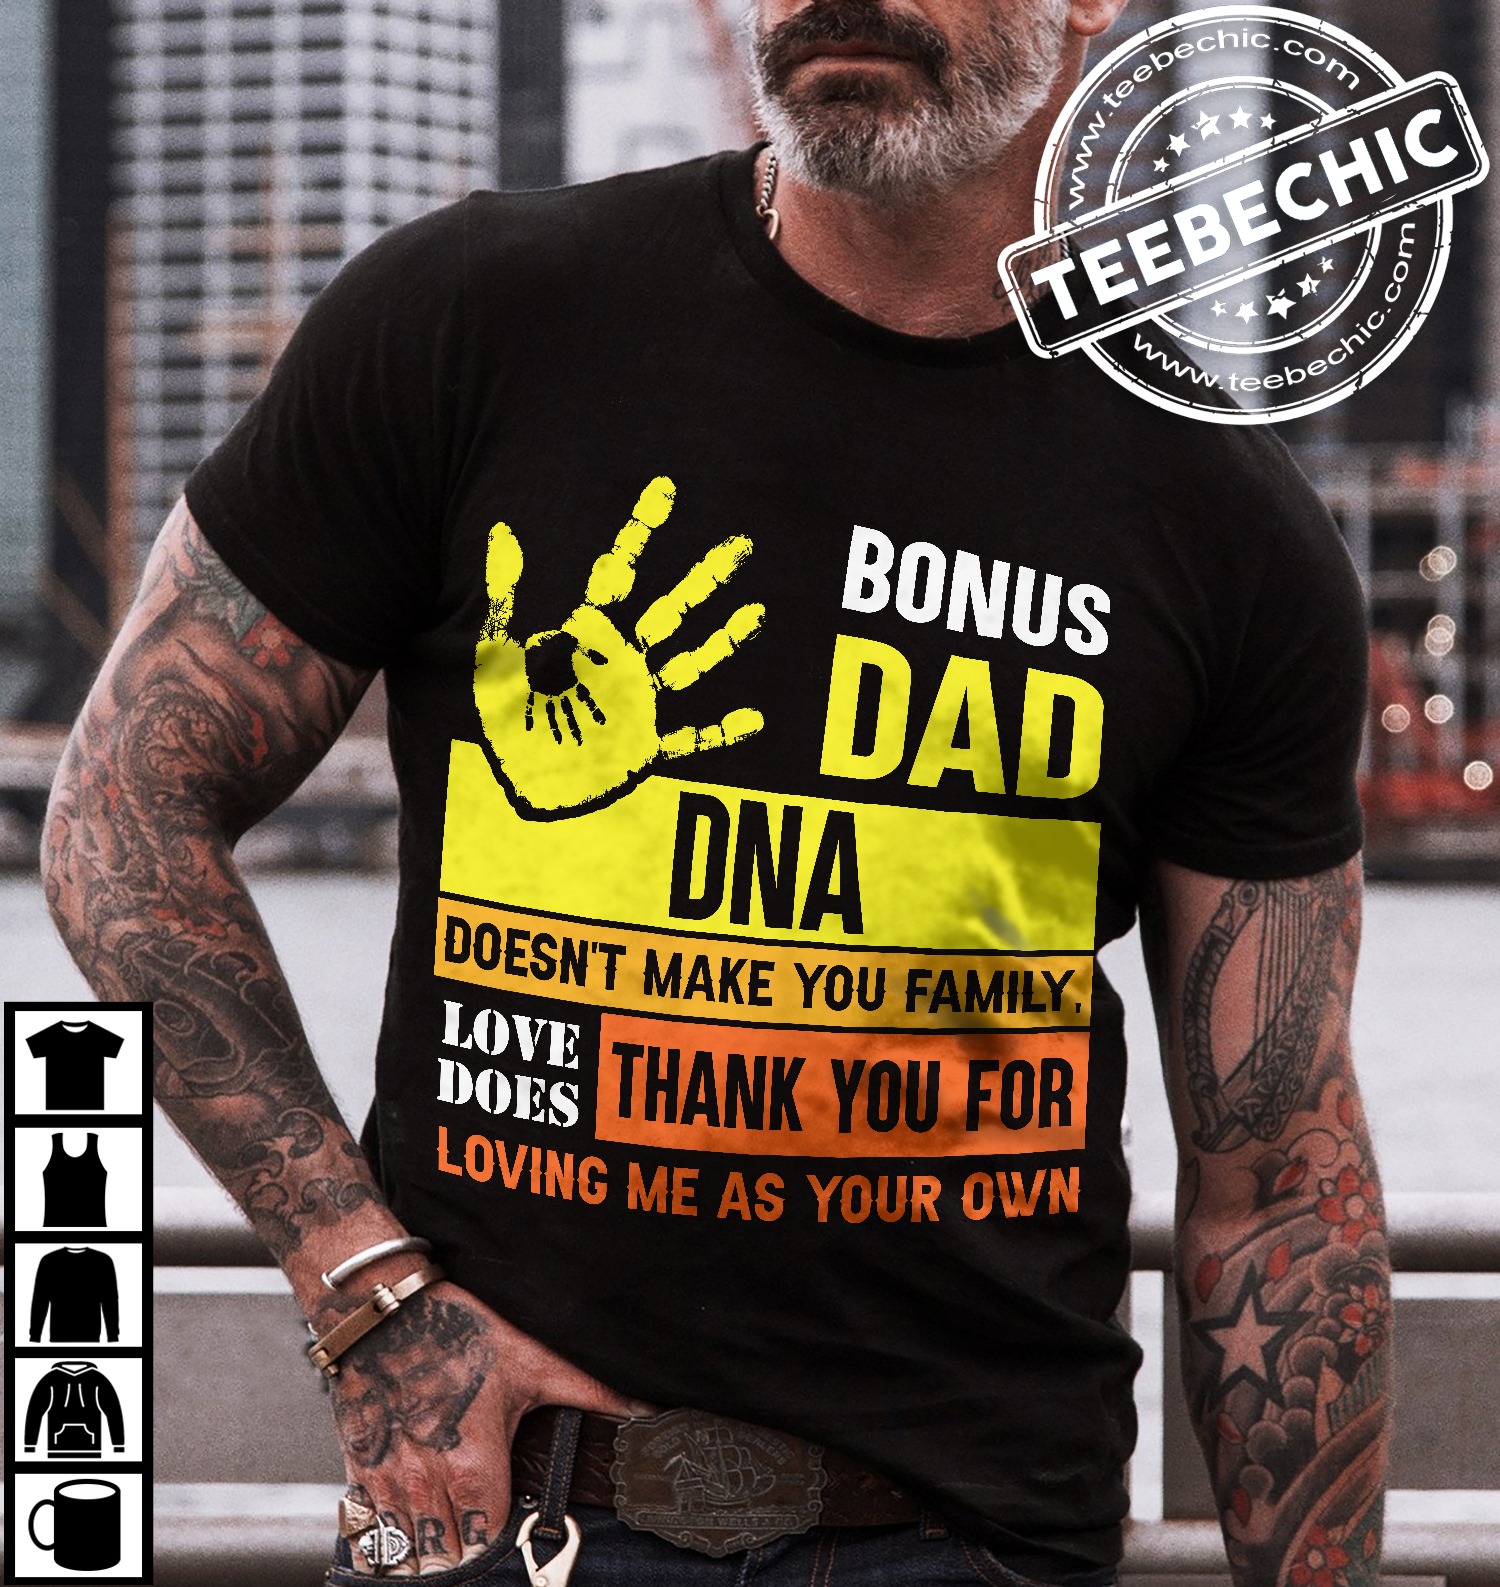 Bonus dad DNA doens't make you family, loves does - Thank you for loving me as your own